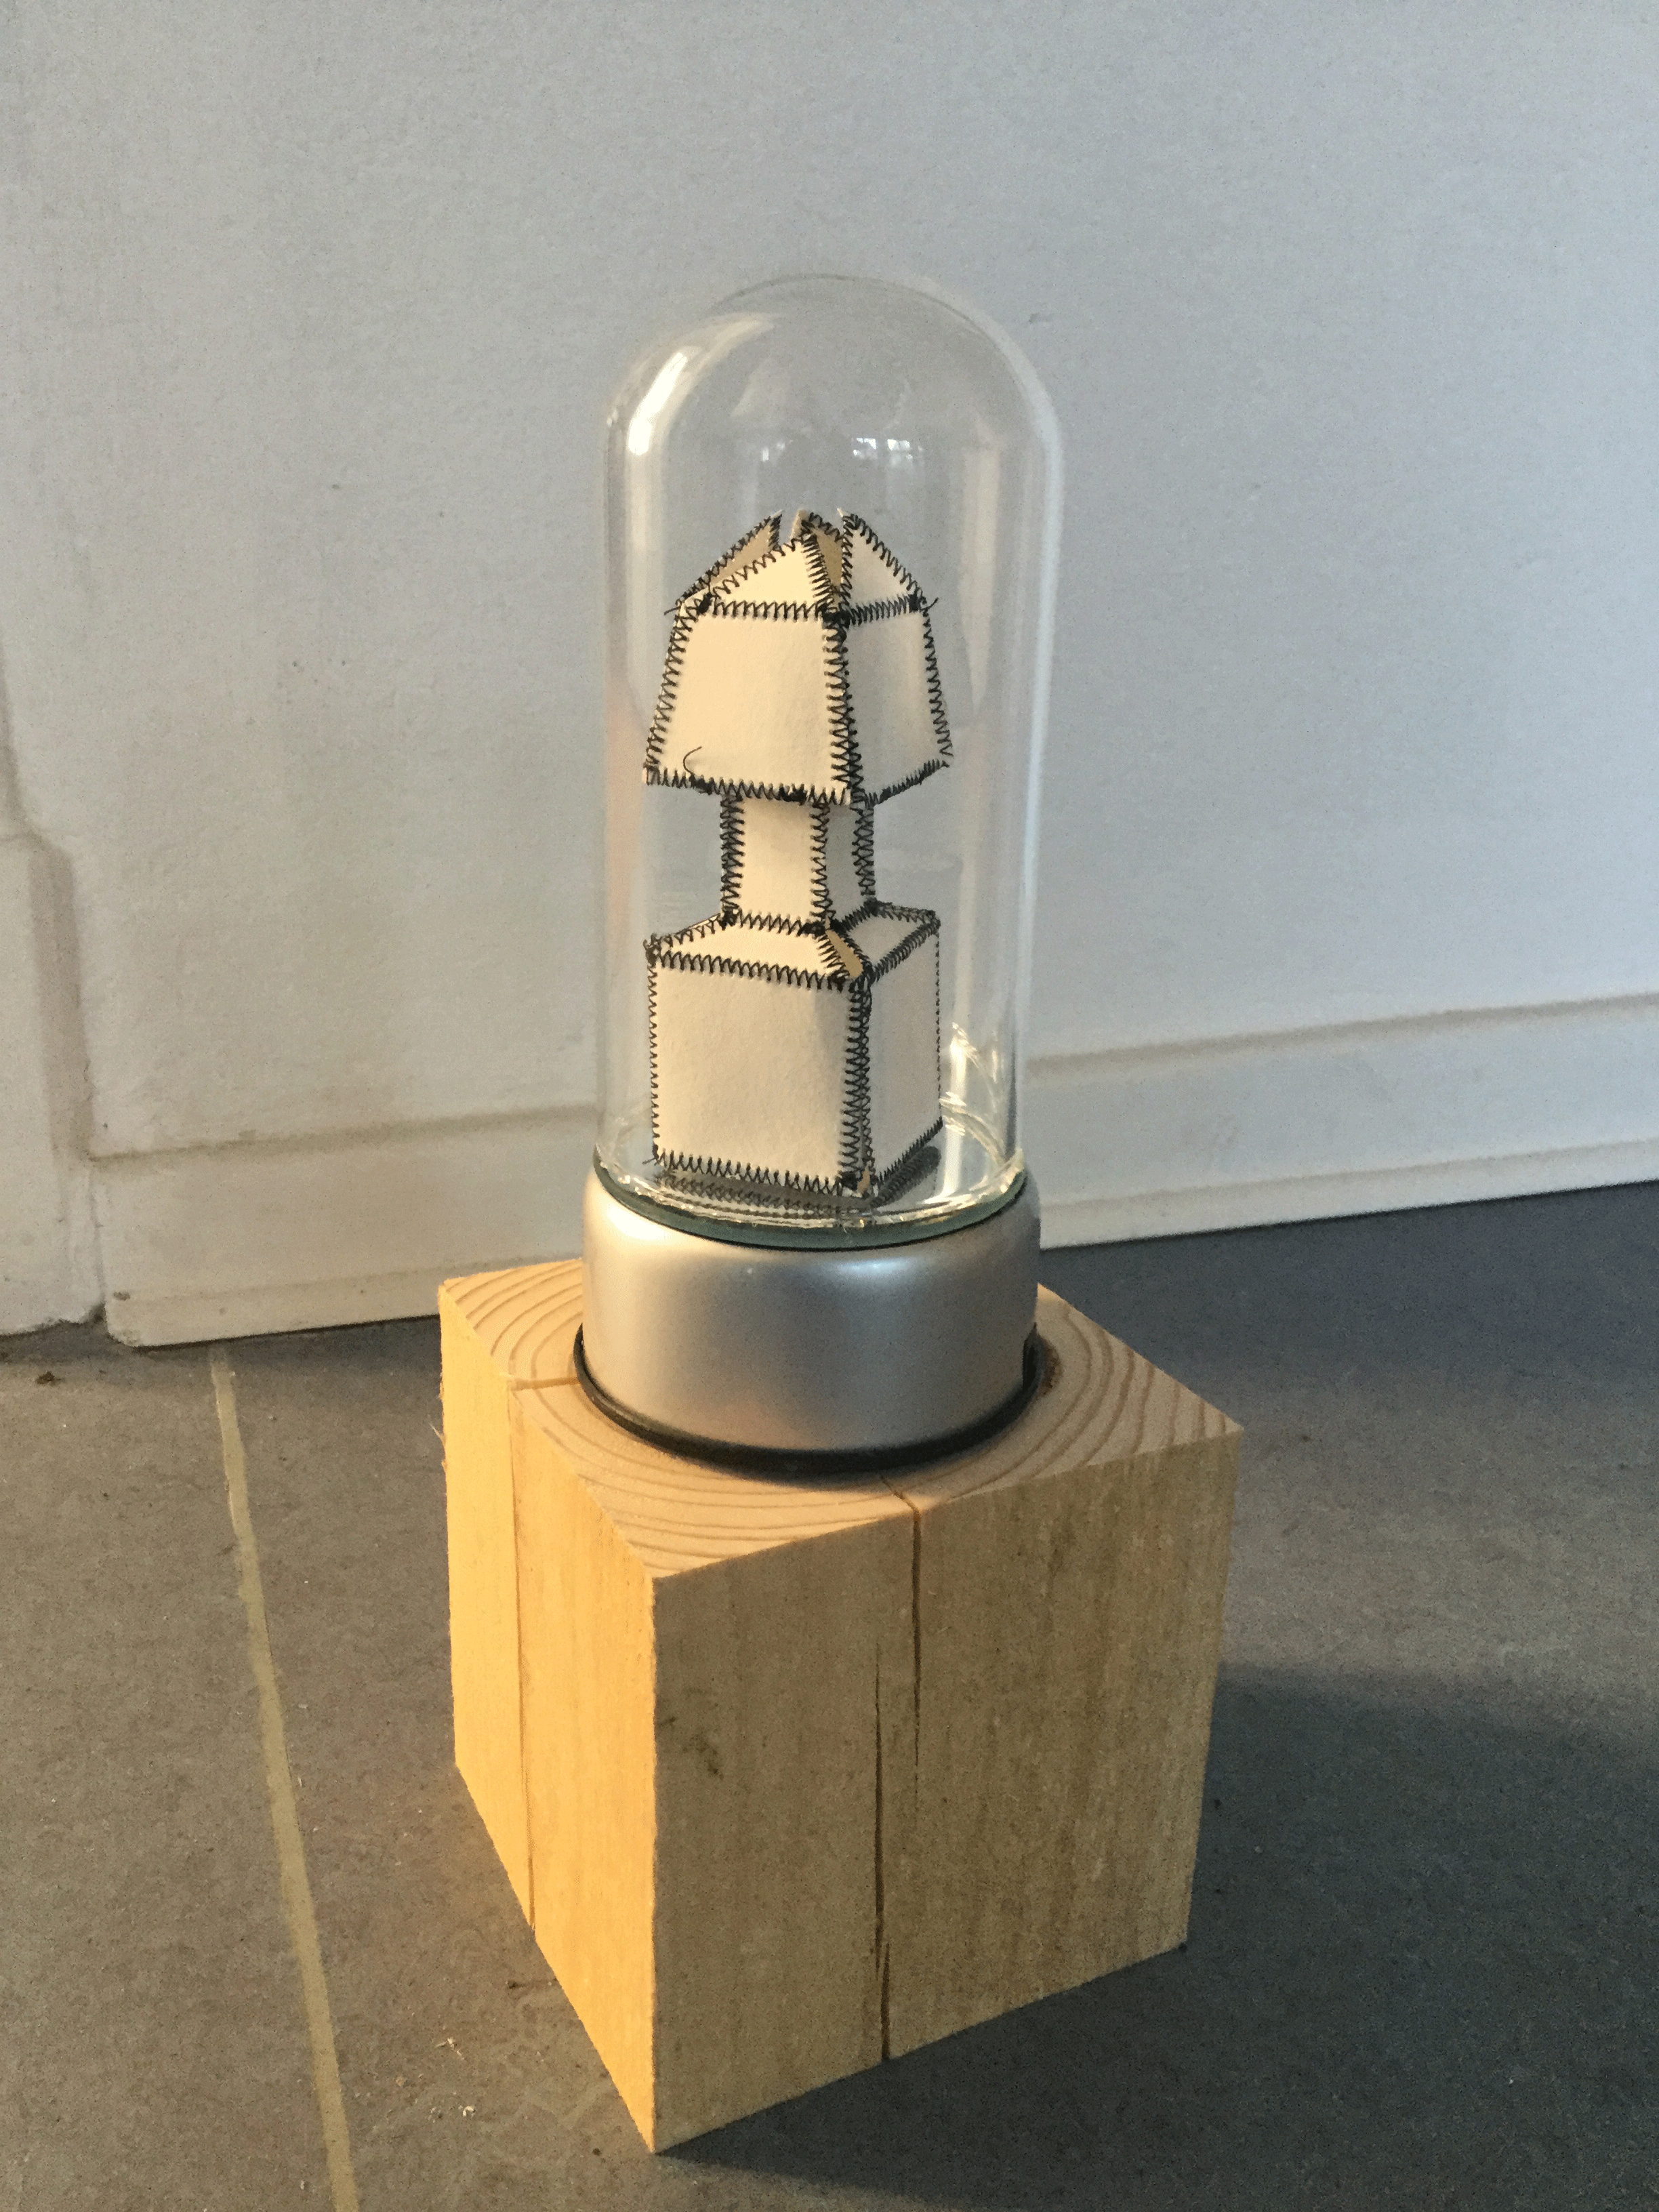 SMALL LAMP IN A BELL JAR 2017

paper/bell jar/light turntable 